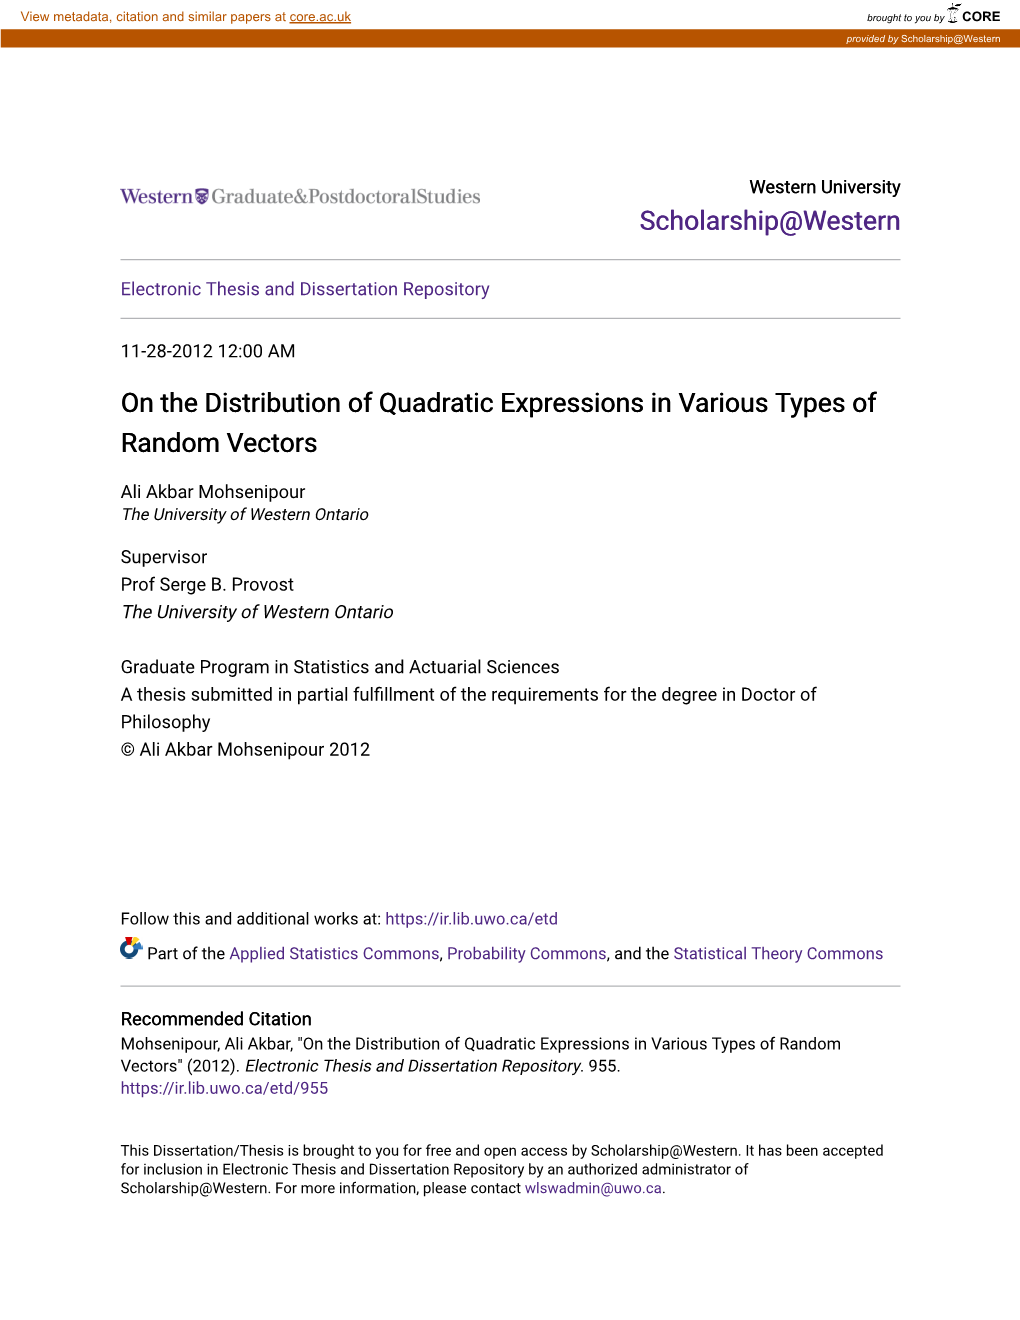 On the Distribution of Quadratic Expressions in Various Types of Random Vectors